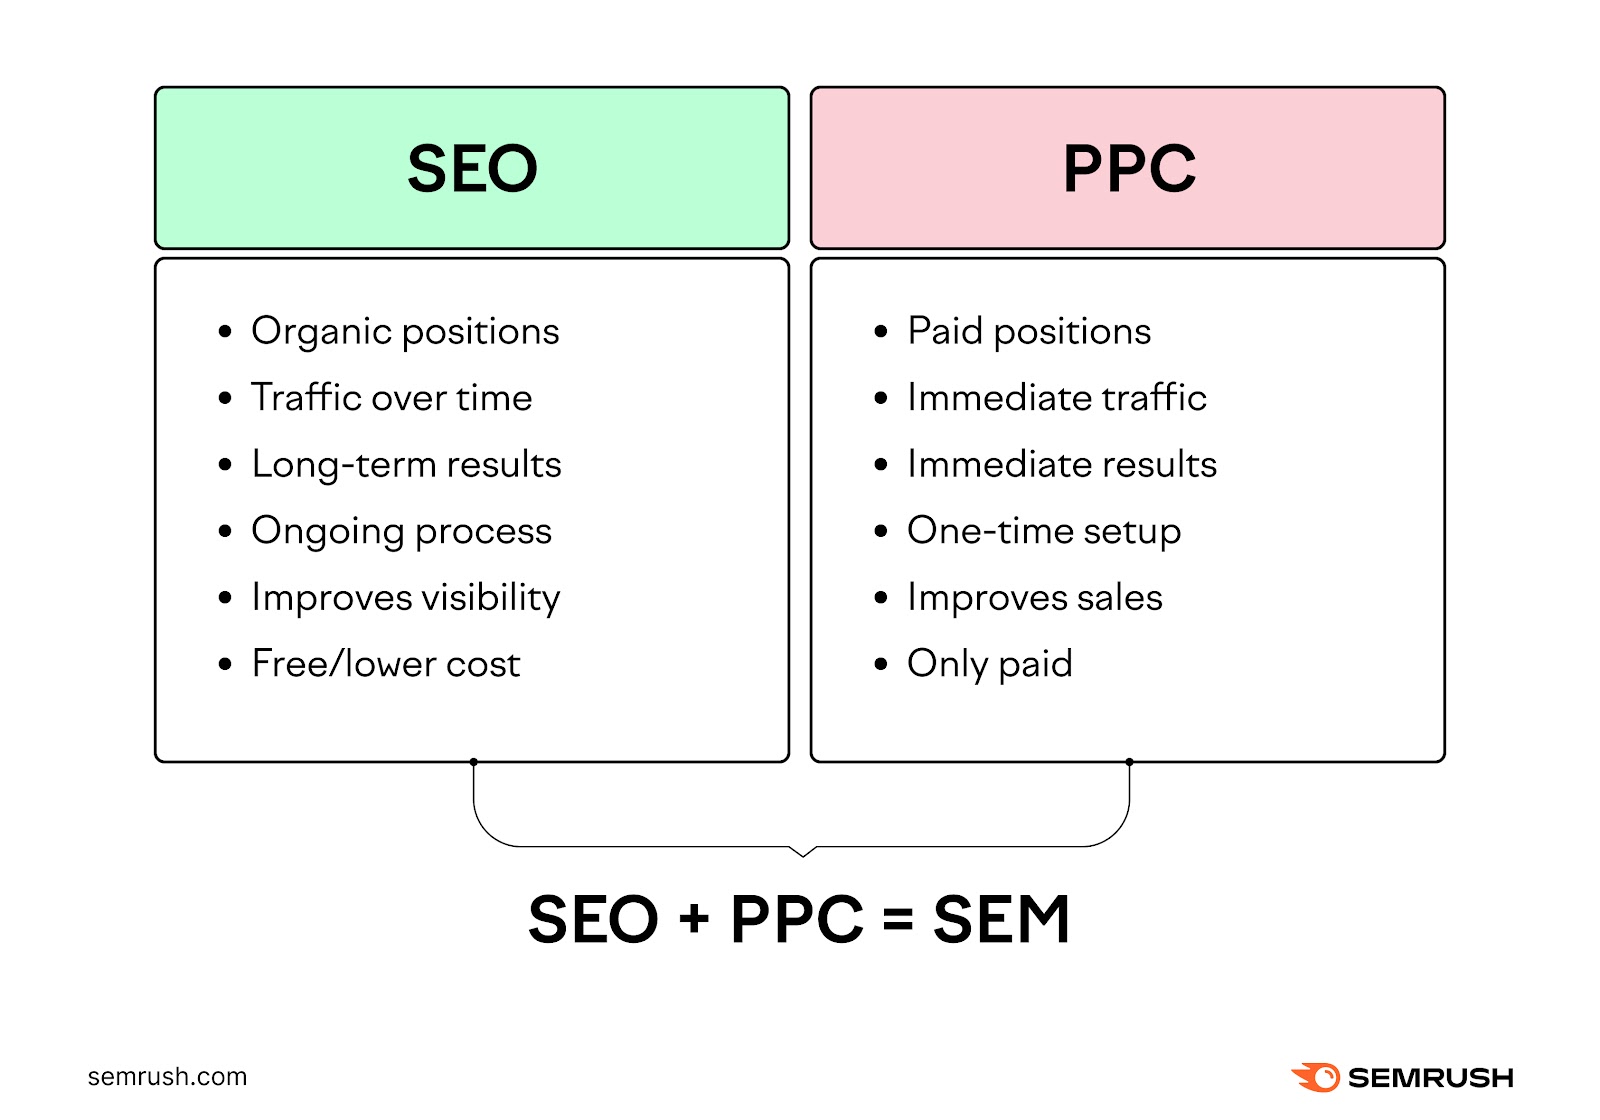 An infographic s،wing ،w SEO compares to PPC (pay-per-click) advertising